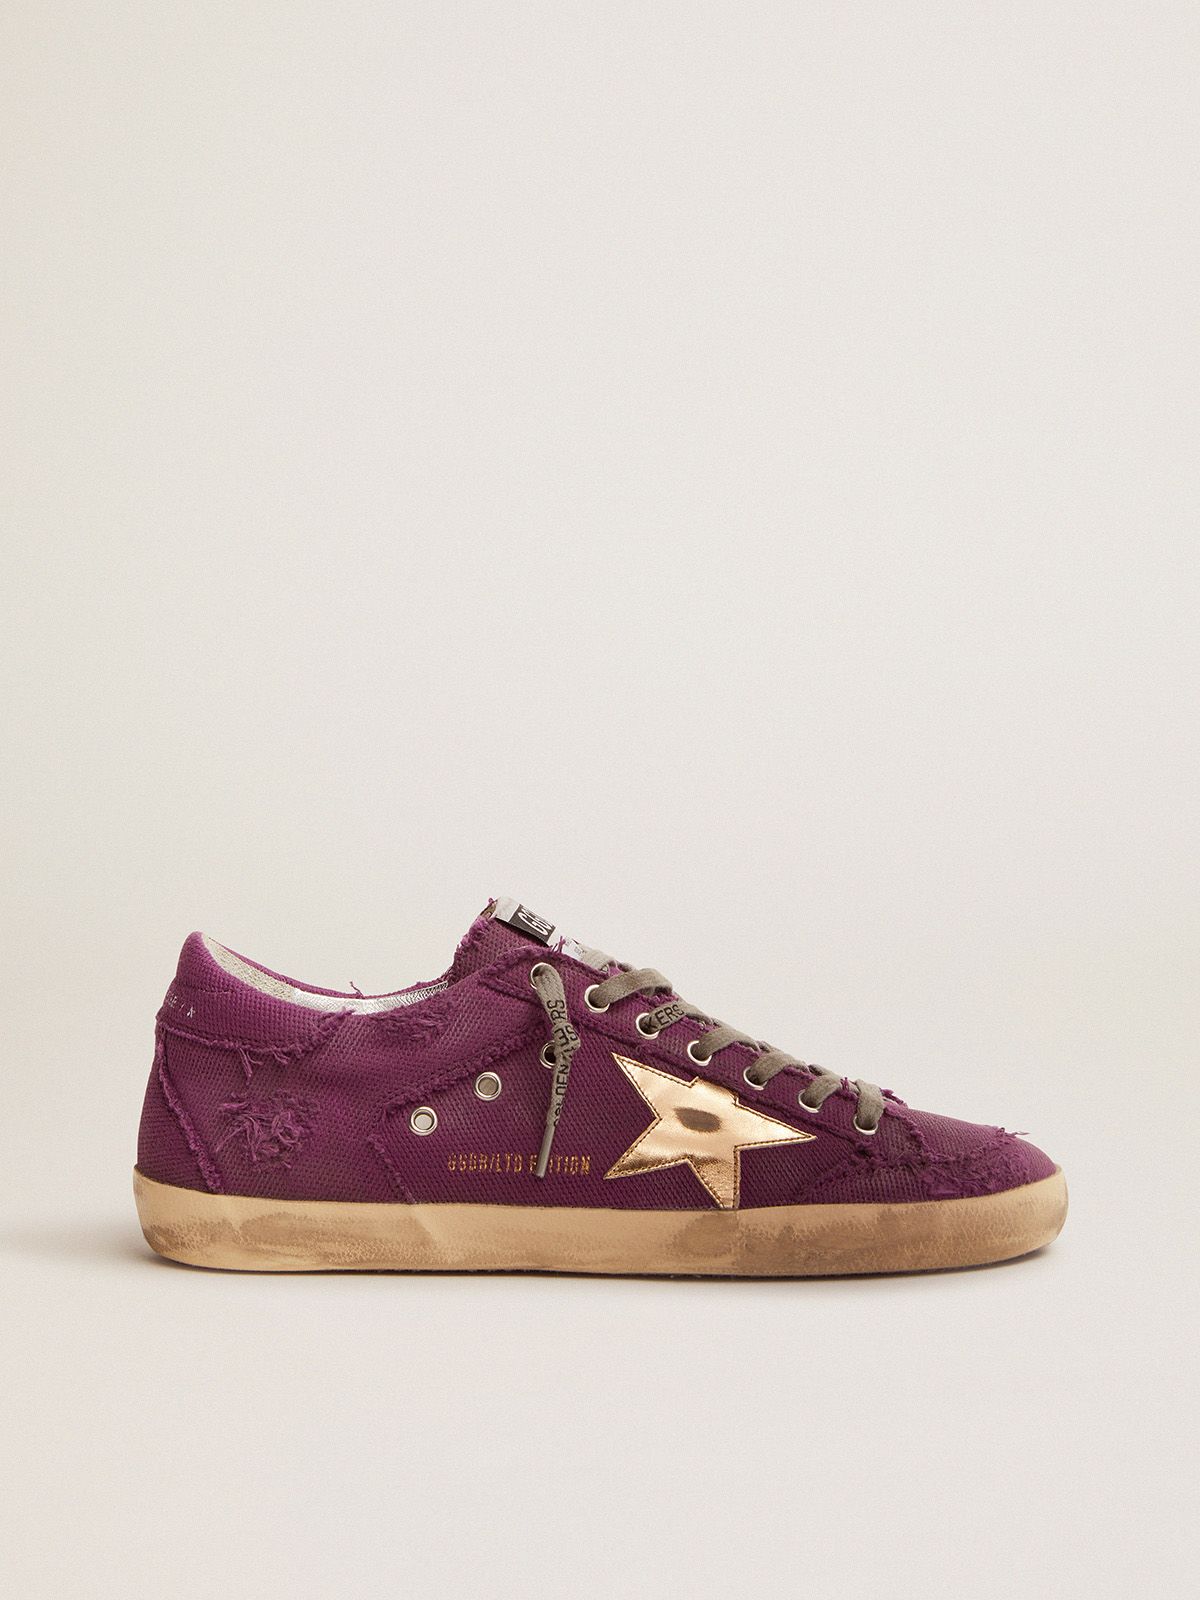 Sneakers Uomo Golden Goose Super-Star Penstar LAB sneakers in purple distressed canvas with gold laminated leather star